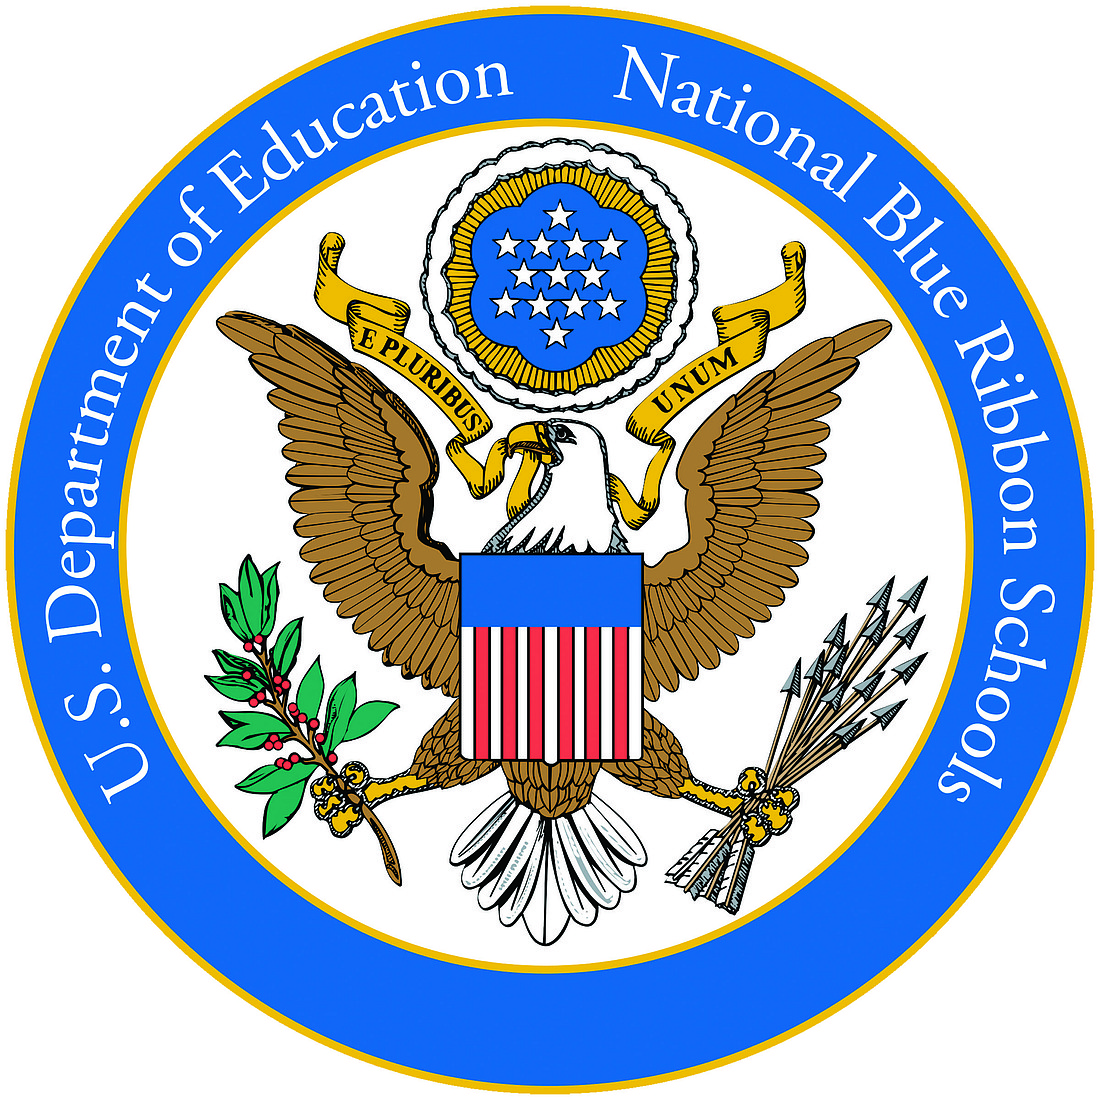 The U.S. Department of Education announced this week that Fort Recovery Middle School has been named a National Blue Ribbon School for 2023. It was one of 19 to earn the honor in Ohio. (U.S. Department of Education)